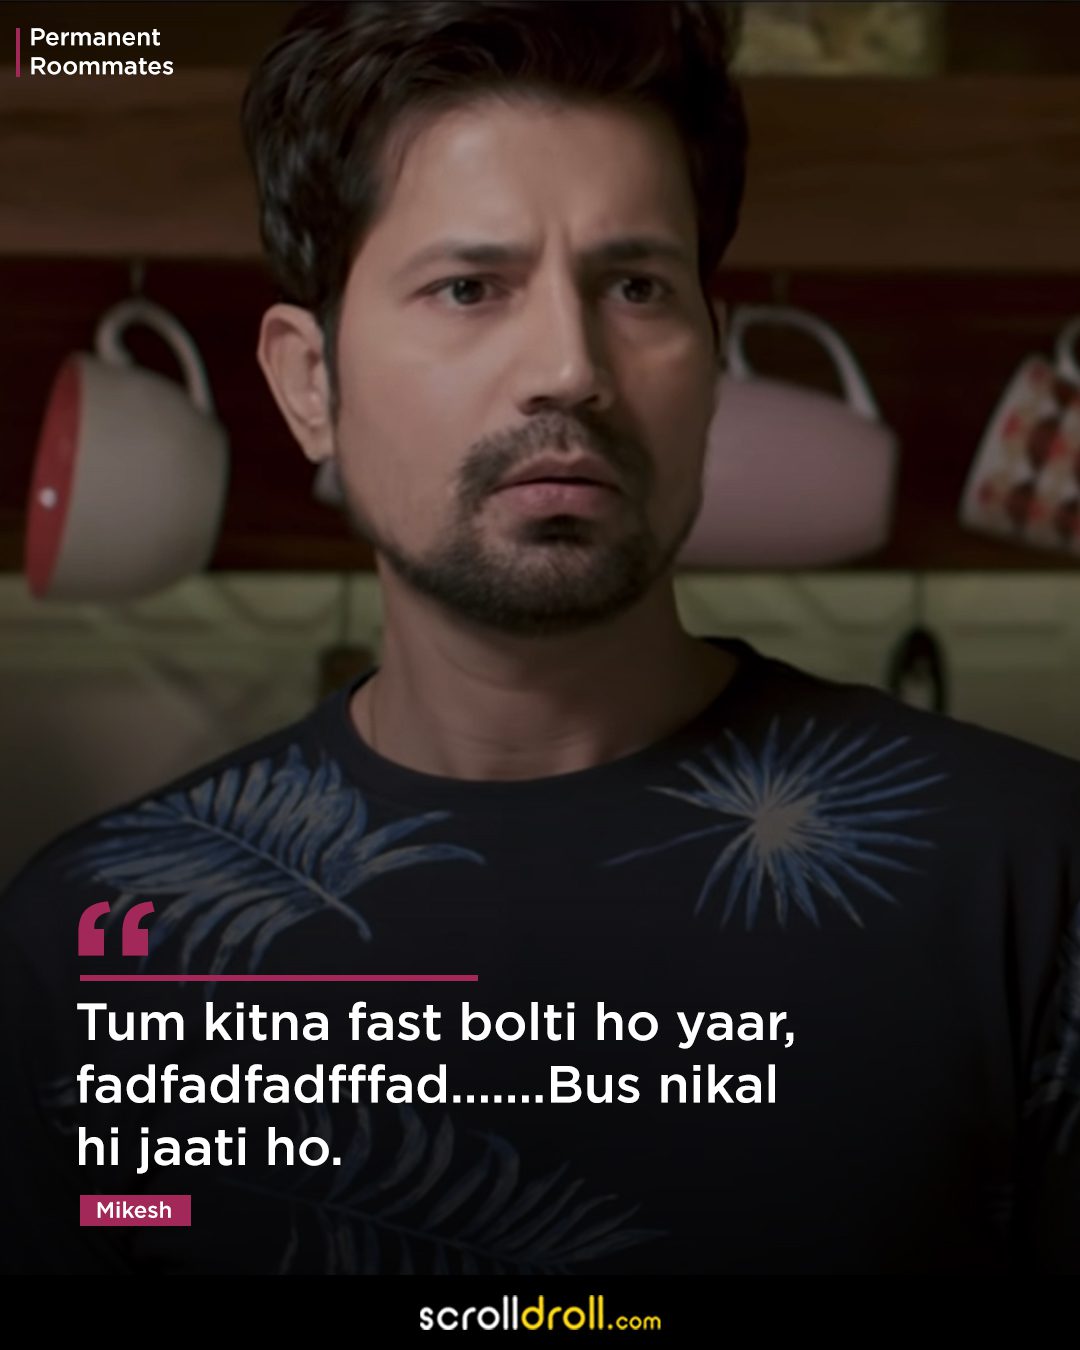 Best Permanent Roommates Dialogues 2 - The Best of Indian Pop Culture ...